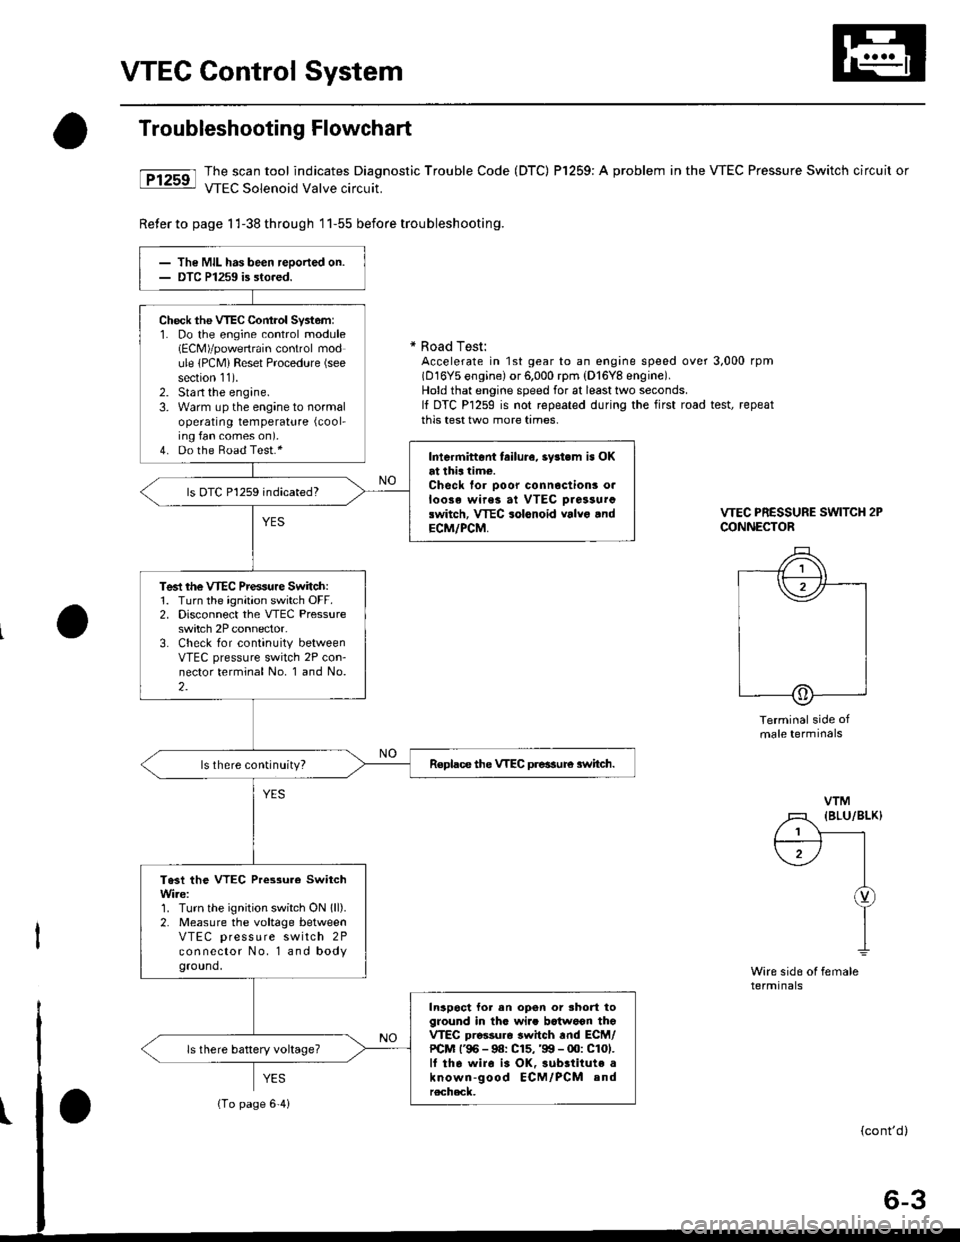 HONDA CIVIC 1999 6.G Workshop Manual VTEC Control System
Troubleshooting Flowchart
tFtrsrl #ilH:::lj1t:"J:T,?ffnostic 
rrouble code (Drc) Pr25e: A probrem in the vrEc Pressure switch circuit or
Reter to page 1 l-38 th roug h 1 1-55 befor